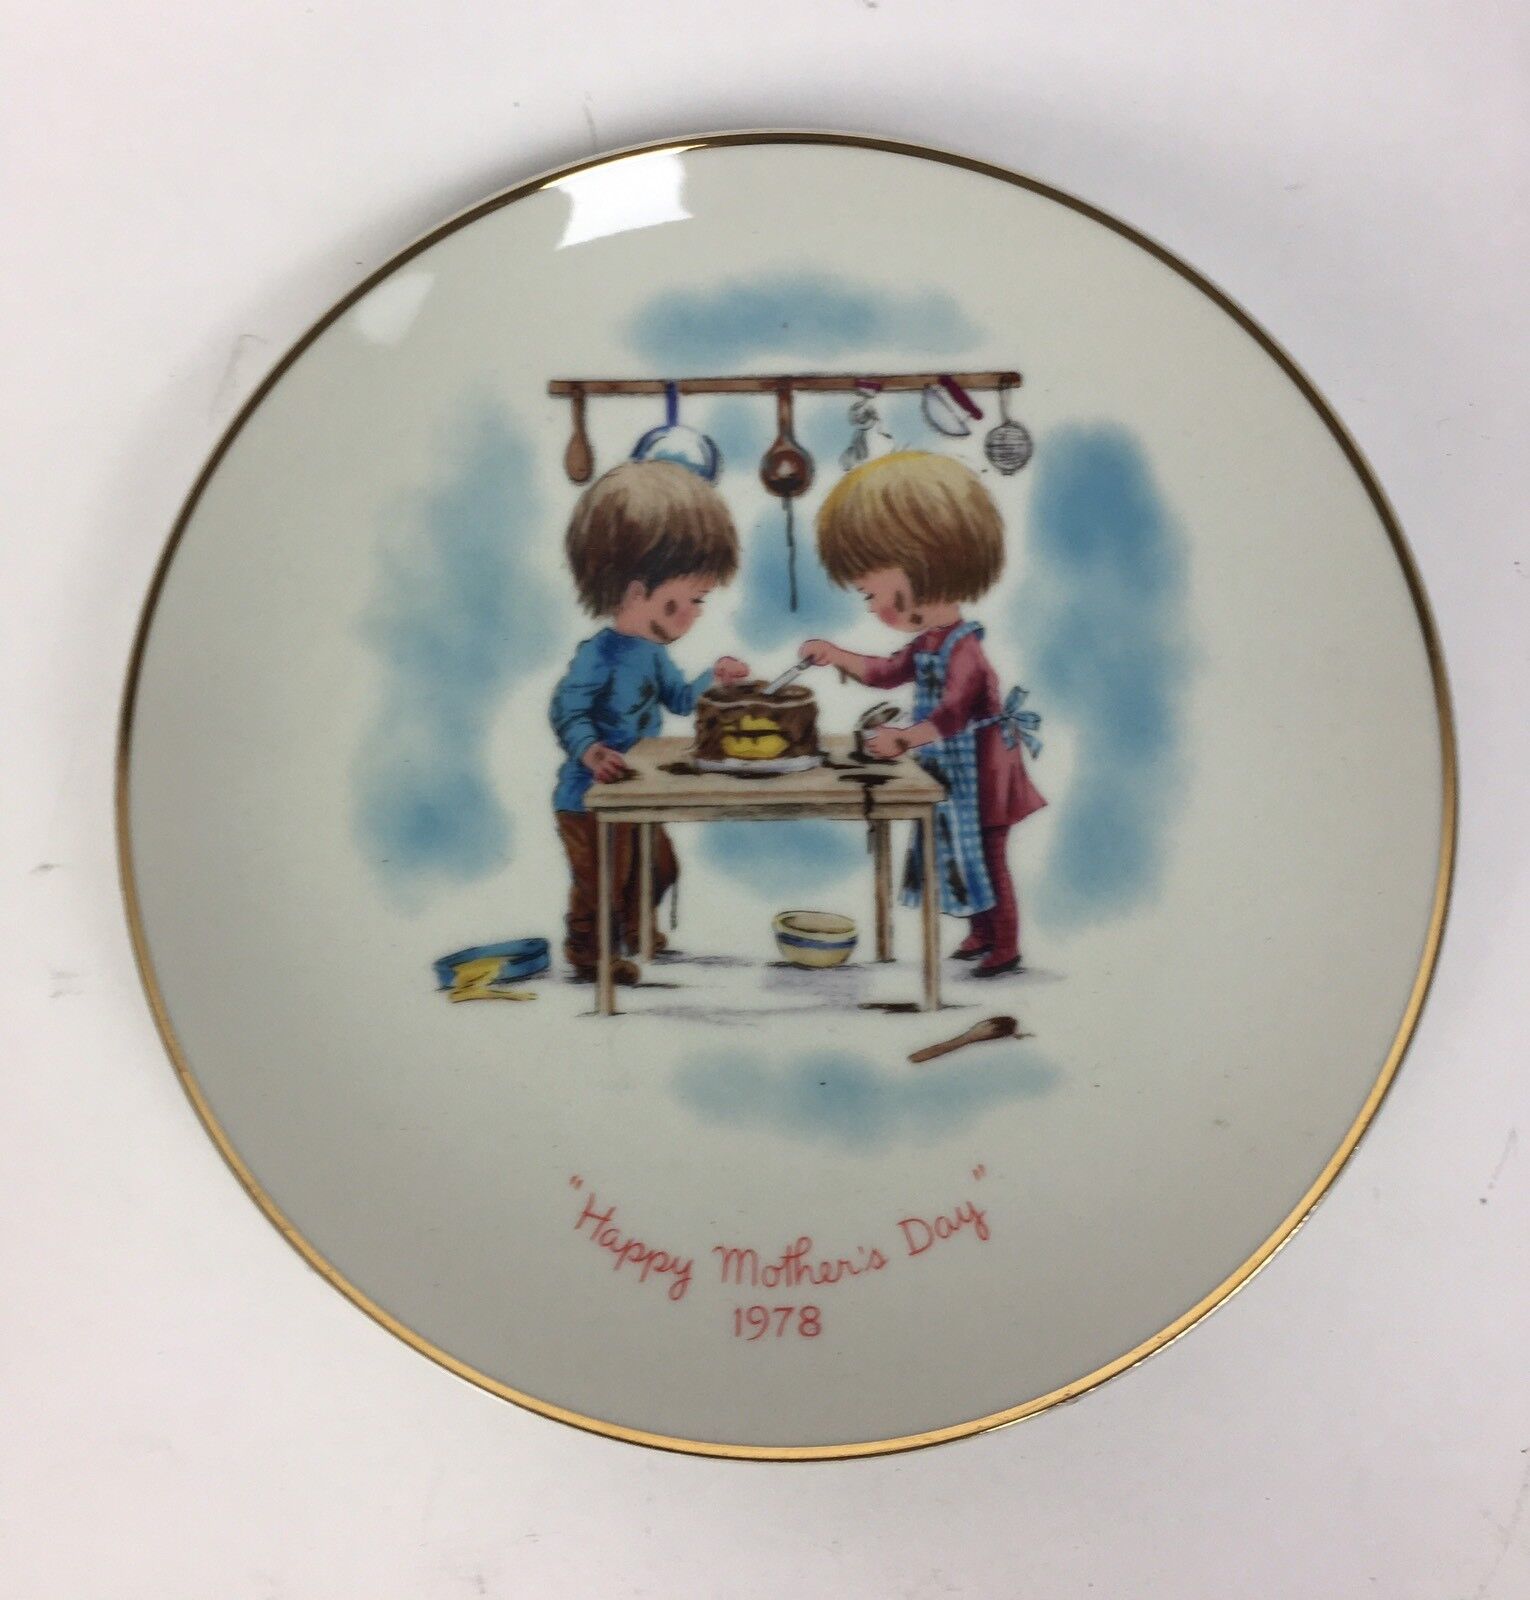 Gorham MOPPETS PLATE 1978 Happy Mothers Day 68358 - $10.00